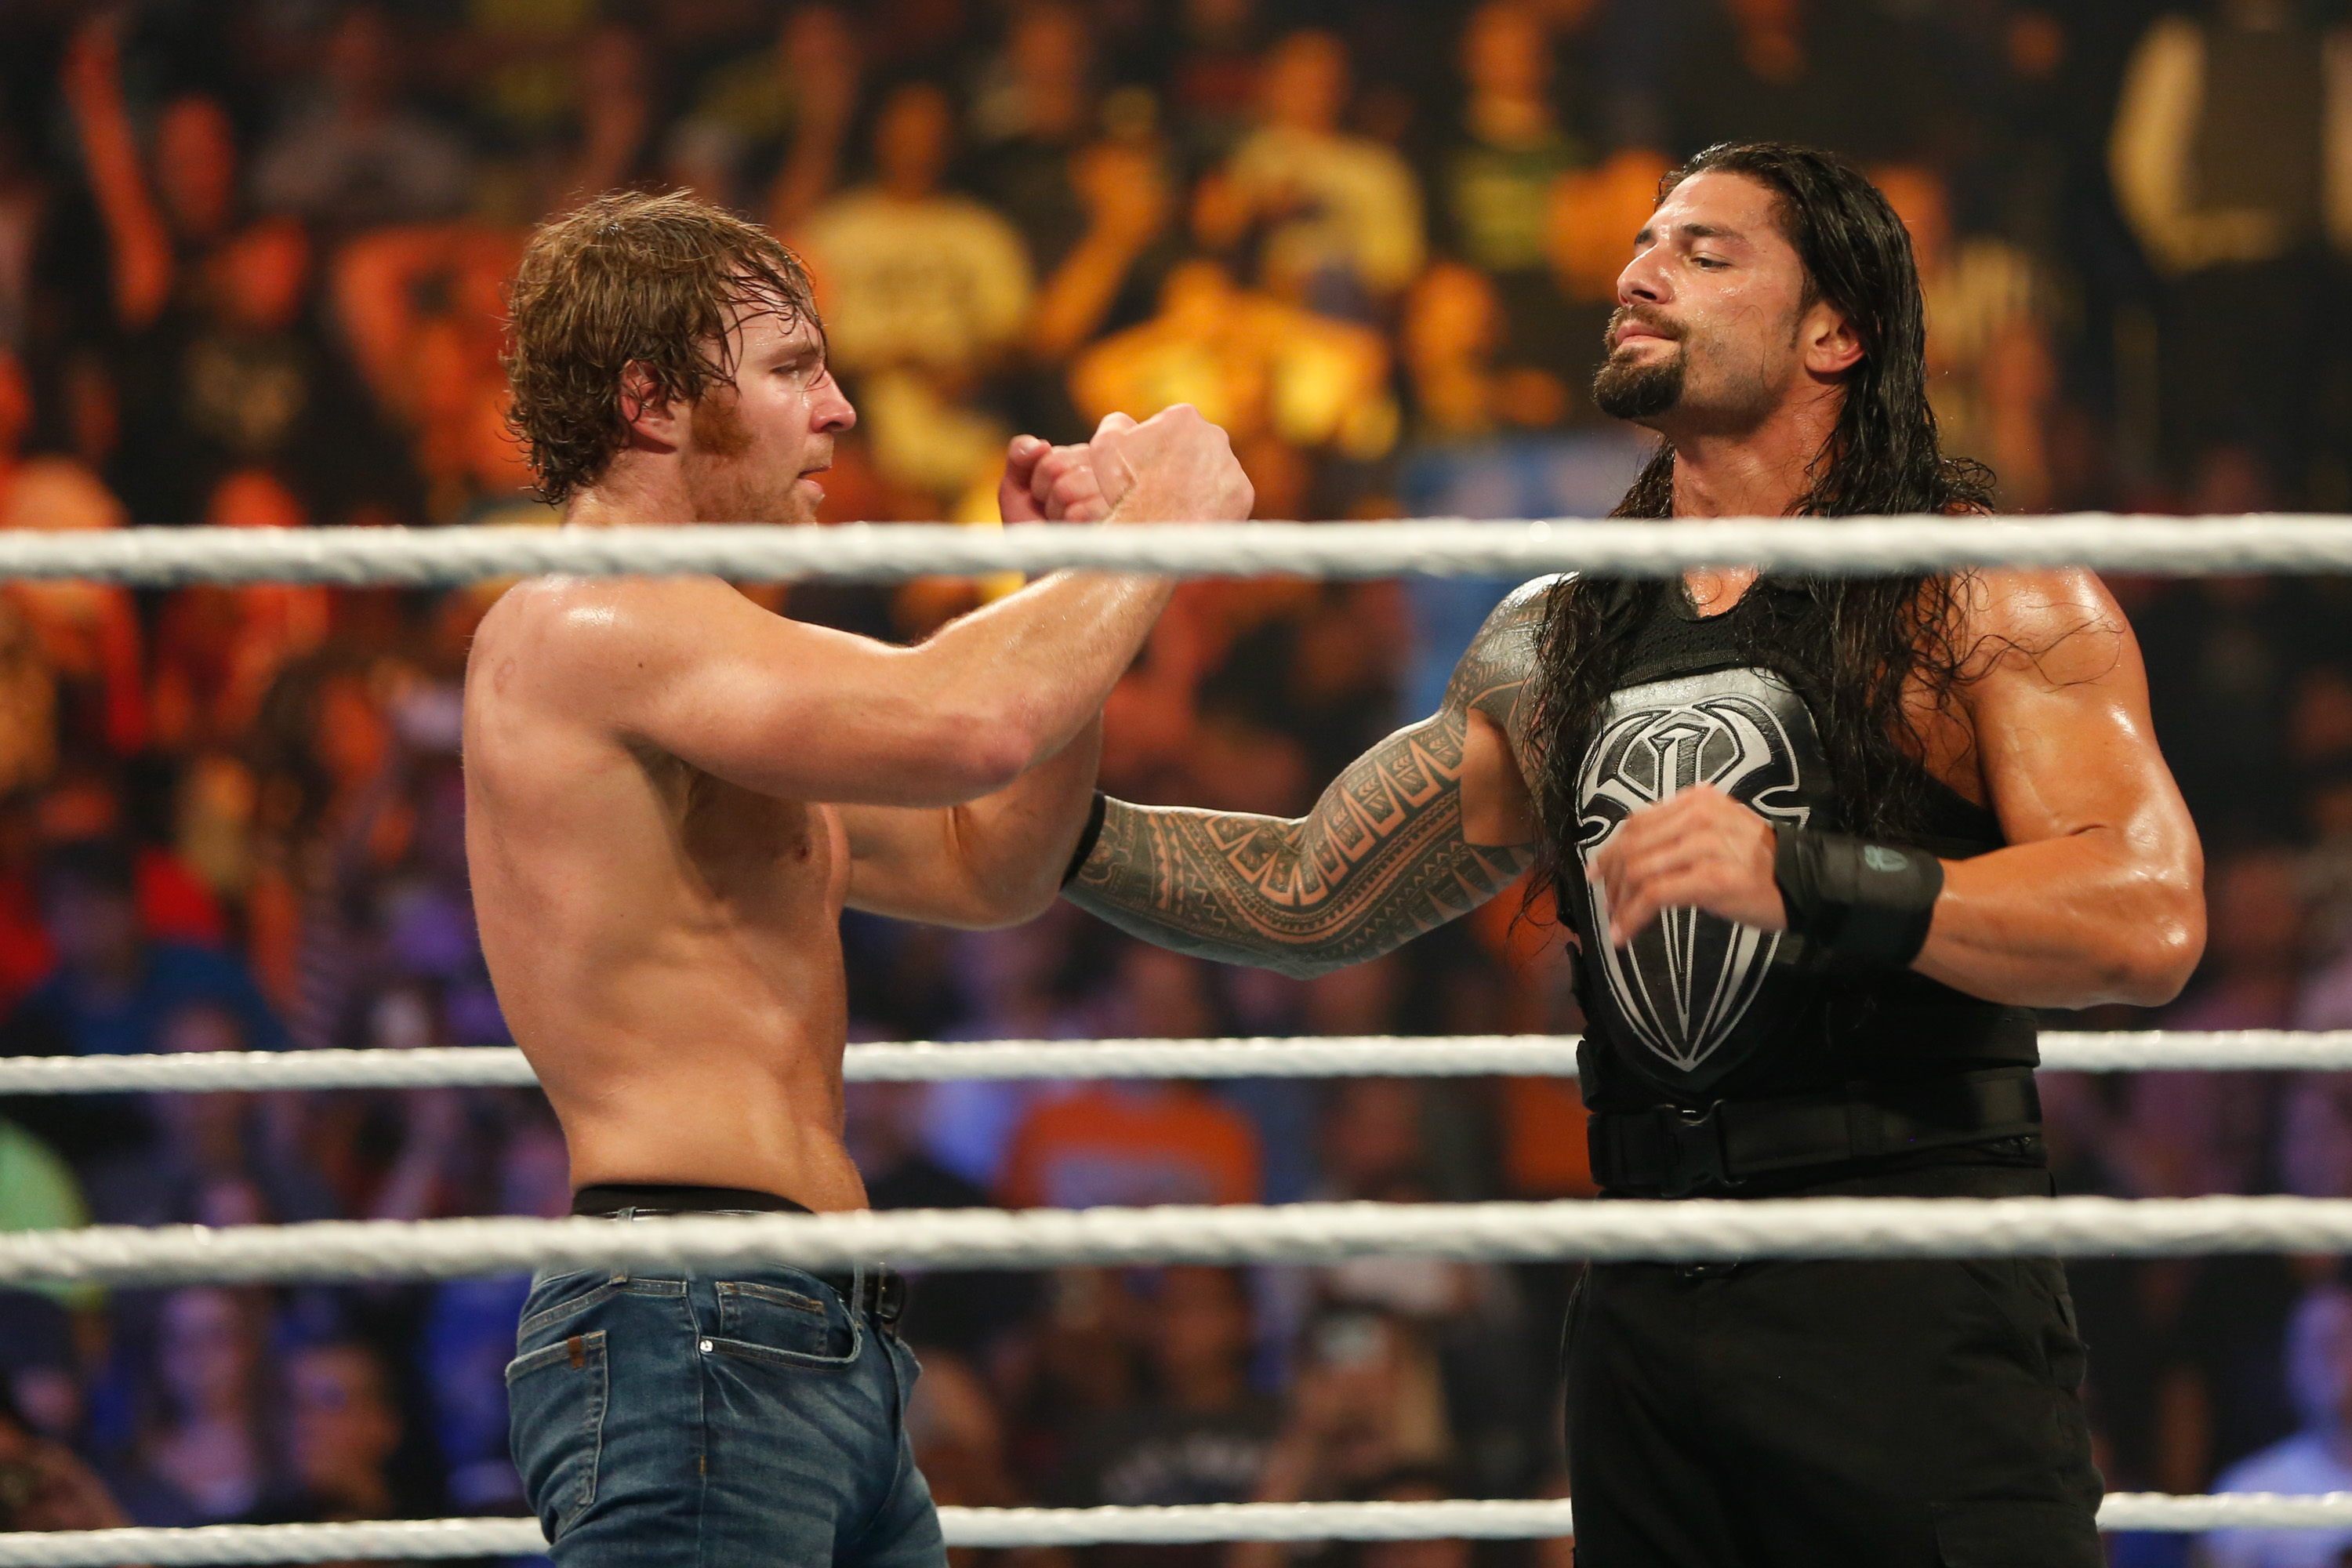 The Shield Reunites On Table For 3 Tonight (Video), Does RAW Or Smackdown Live Have Better Champions?, Vince Wishes Edge A Happy Birthday